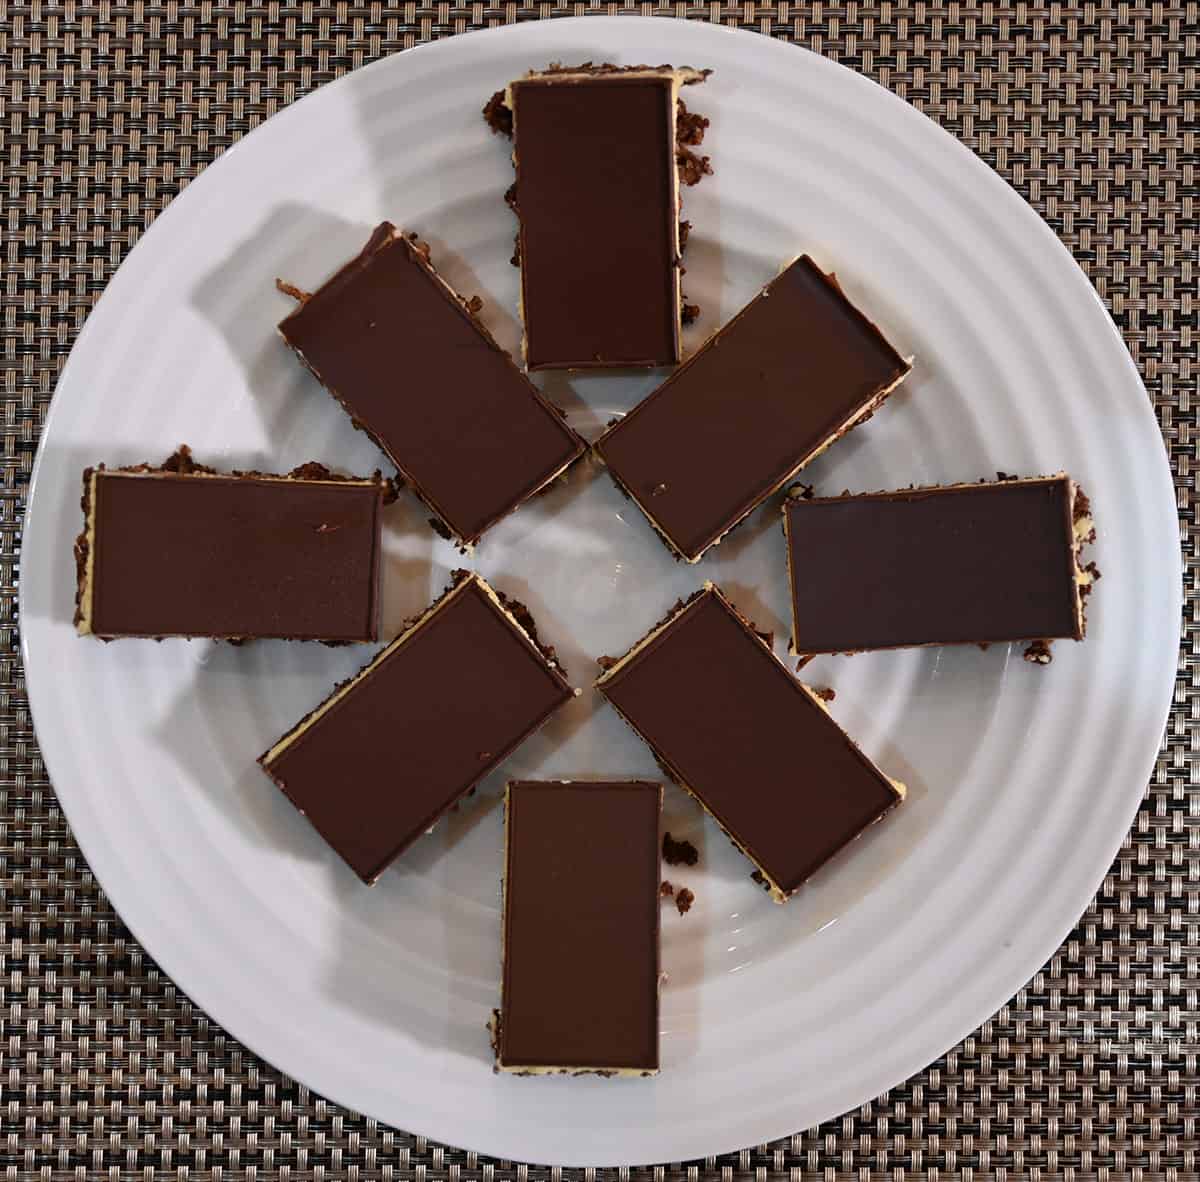 Top down image of the Nanaimo bars cut and served on a white plate.